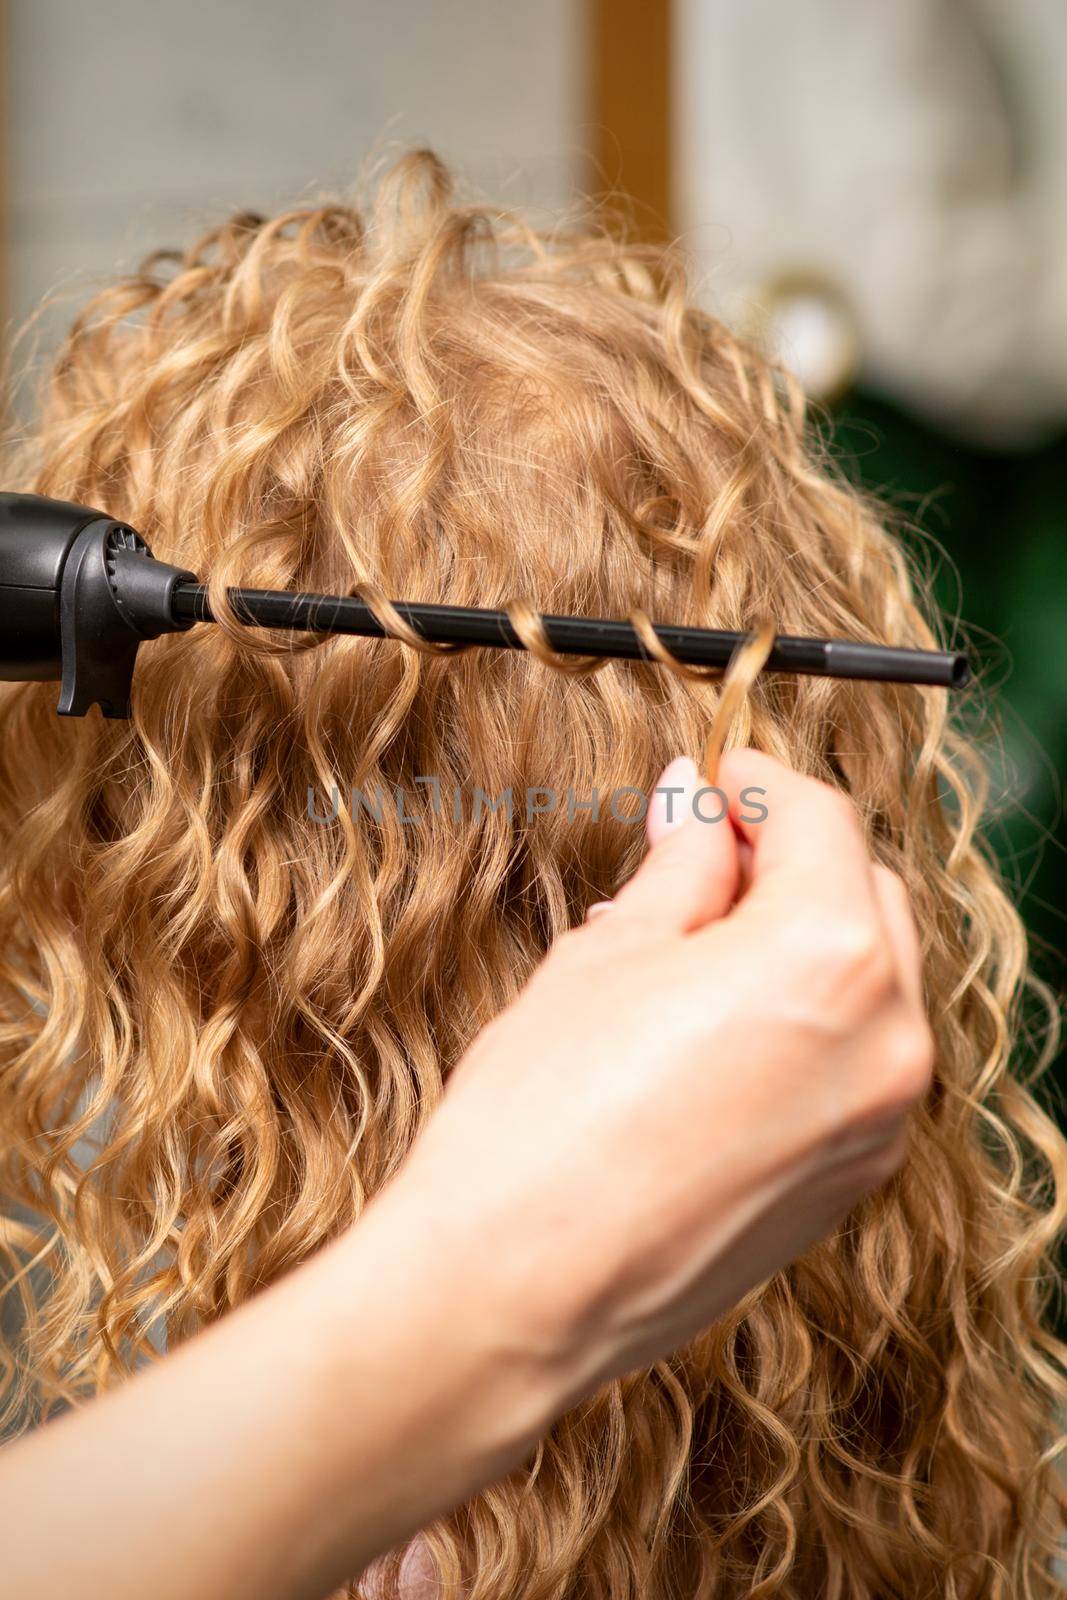 Hands of hairstylist curl wavy hair of young woman using a curling iron for hair curls in the beauty salon rear view. by okskukuruza